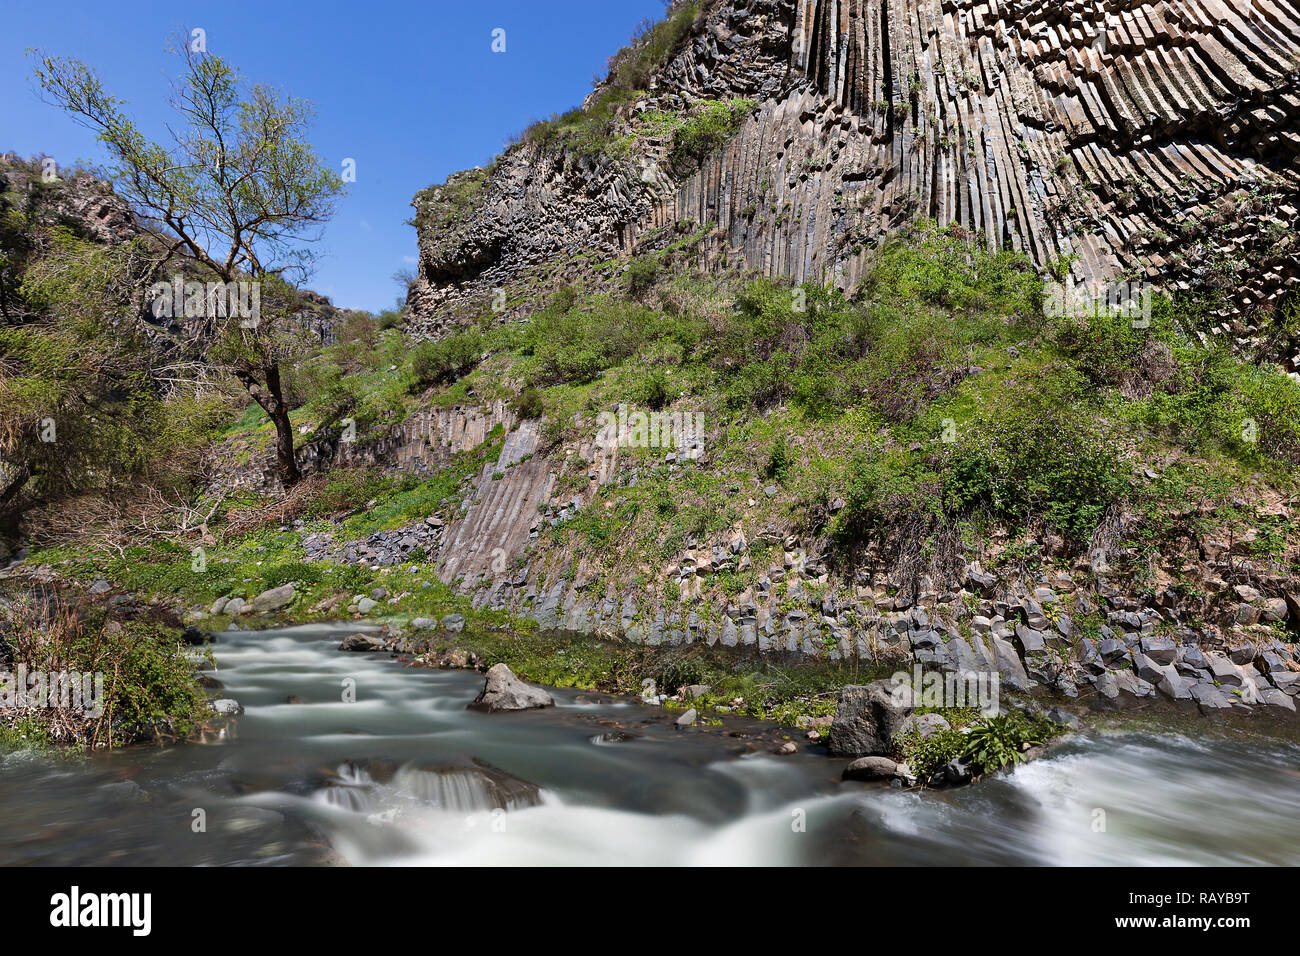 Basalt rock formations known as Symphony of the Stones, in Garni, Armenia. Stock Photo